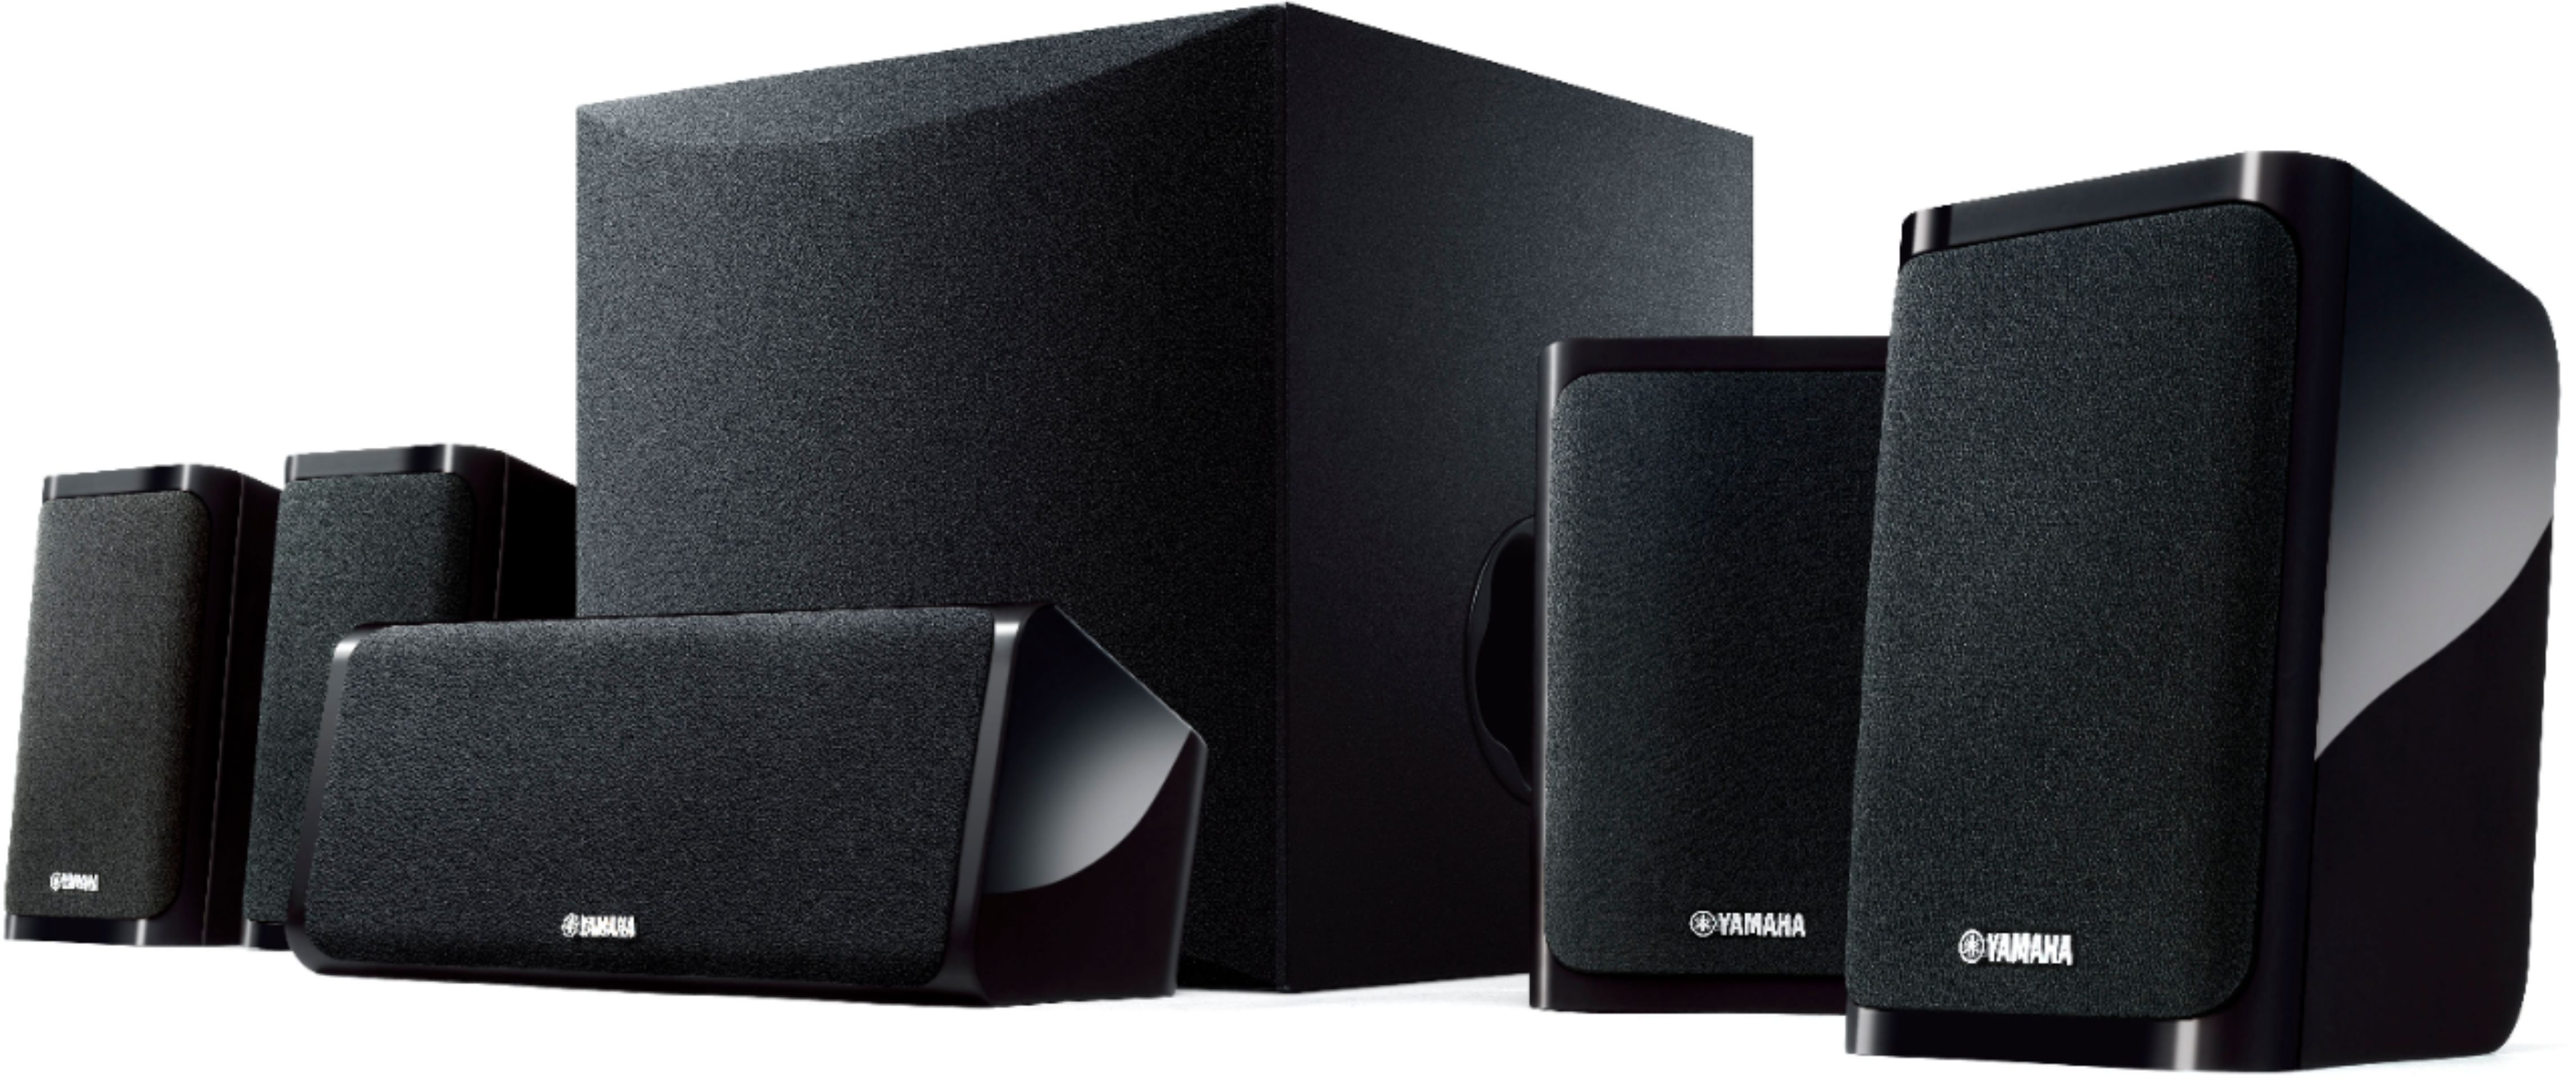 Yamaha 5.1-Channel 4K Home Theater Speaker System with Powered and Bluetooth Streaming Black YHT-4950UBL - Best Buy